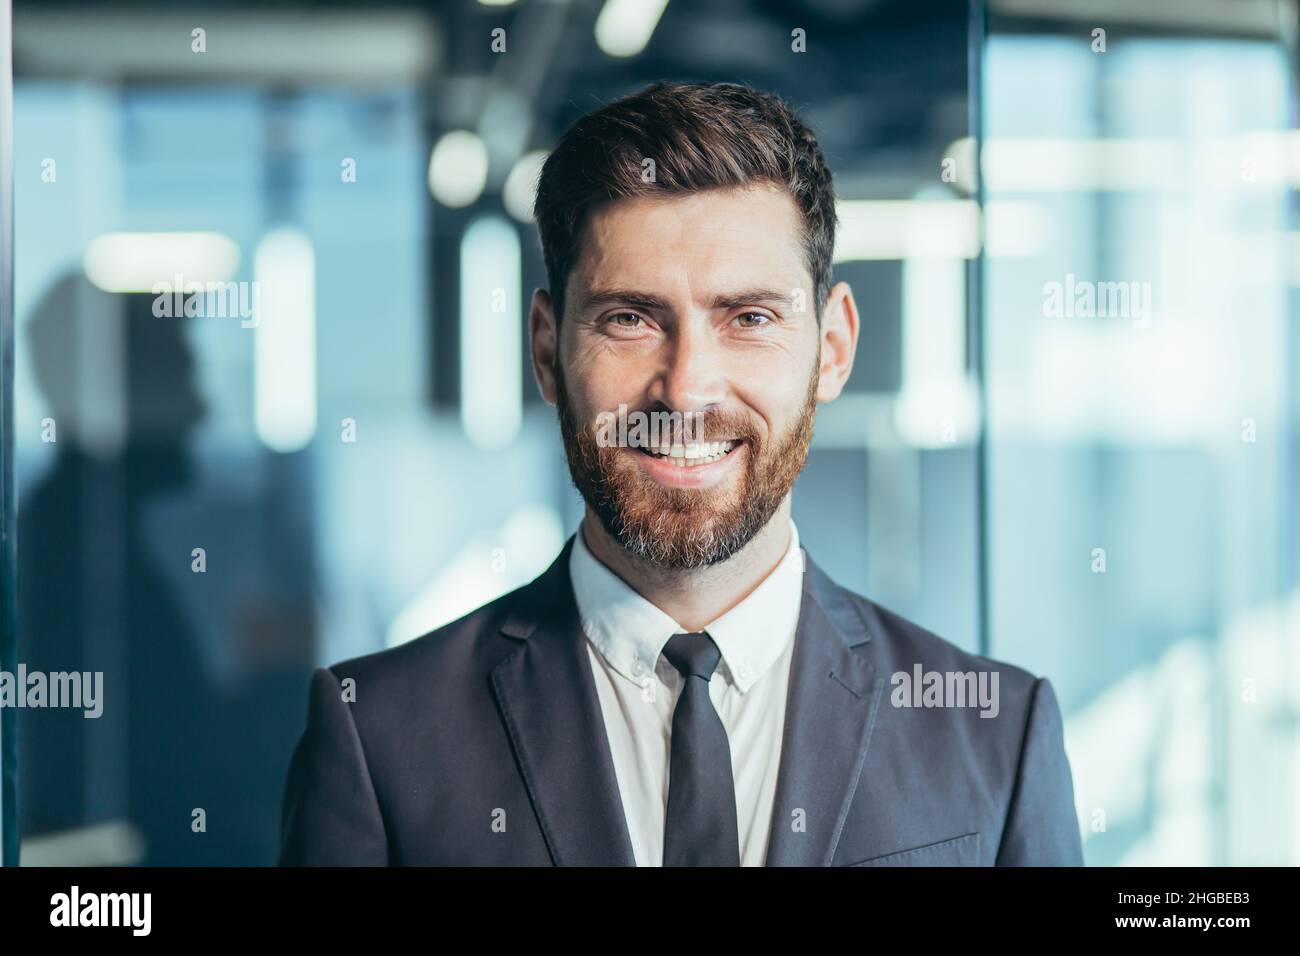 Close-up portrait of businessman with beard looking at camera and smiling, man in modern office Stock Photo